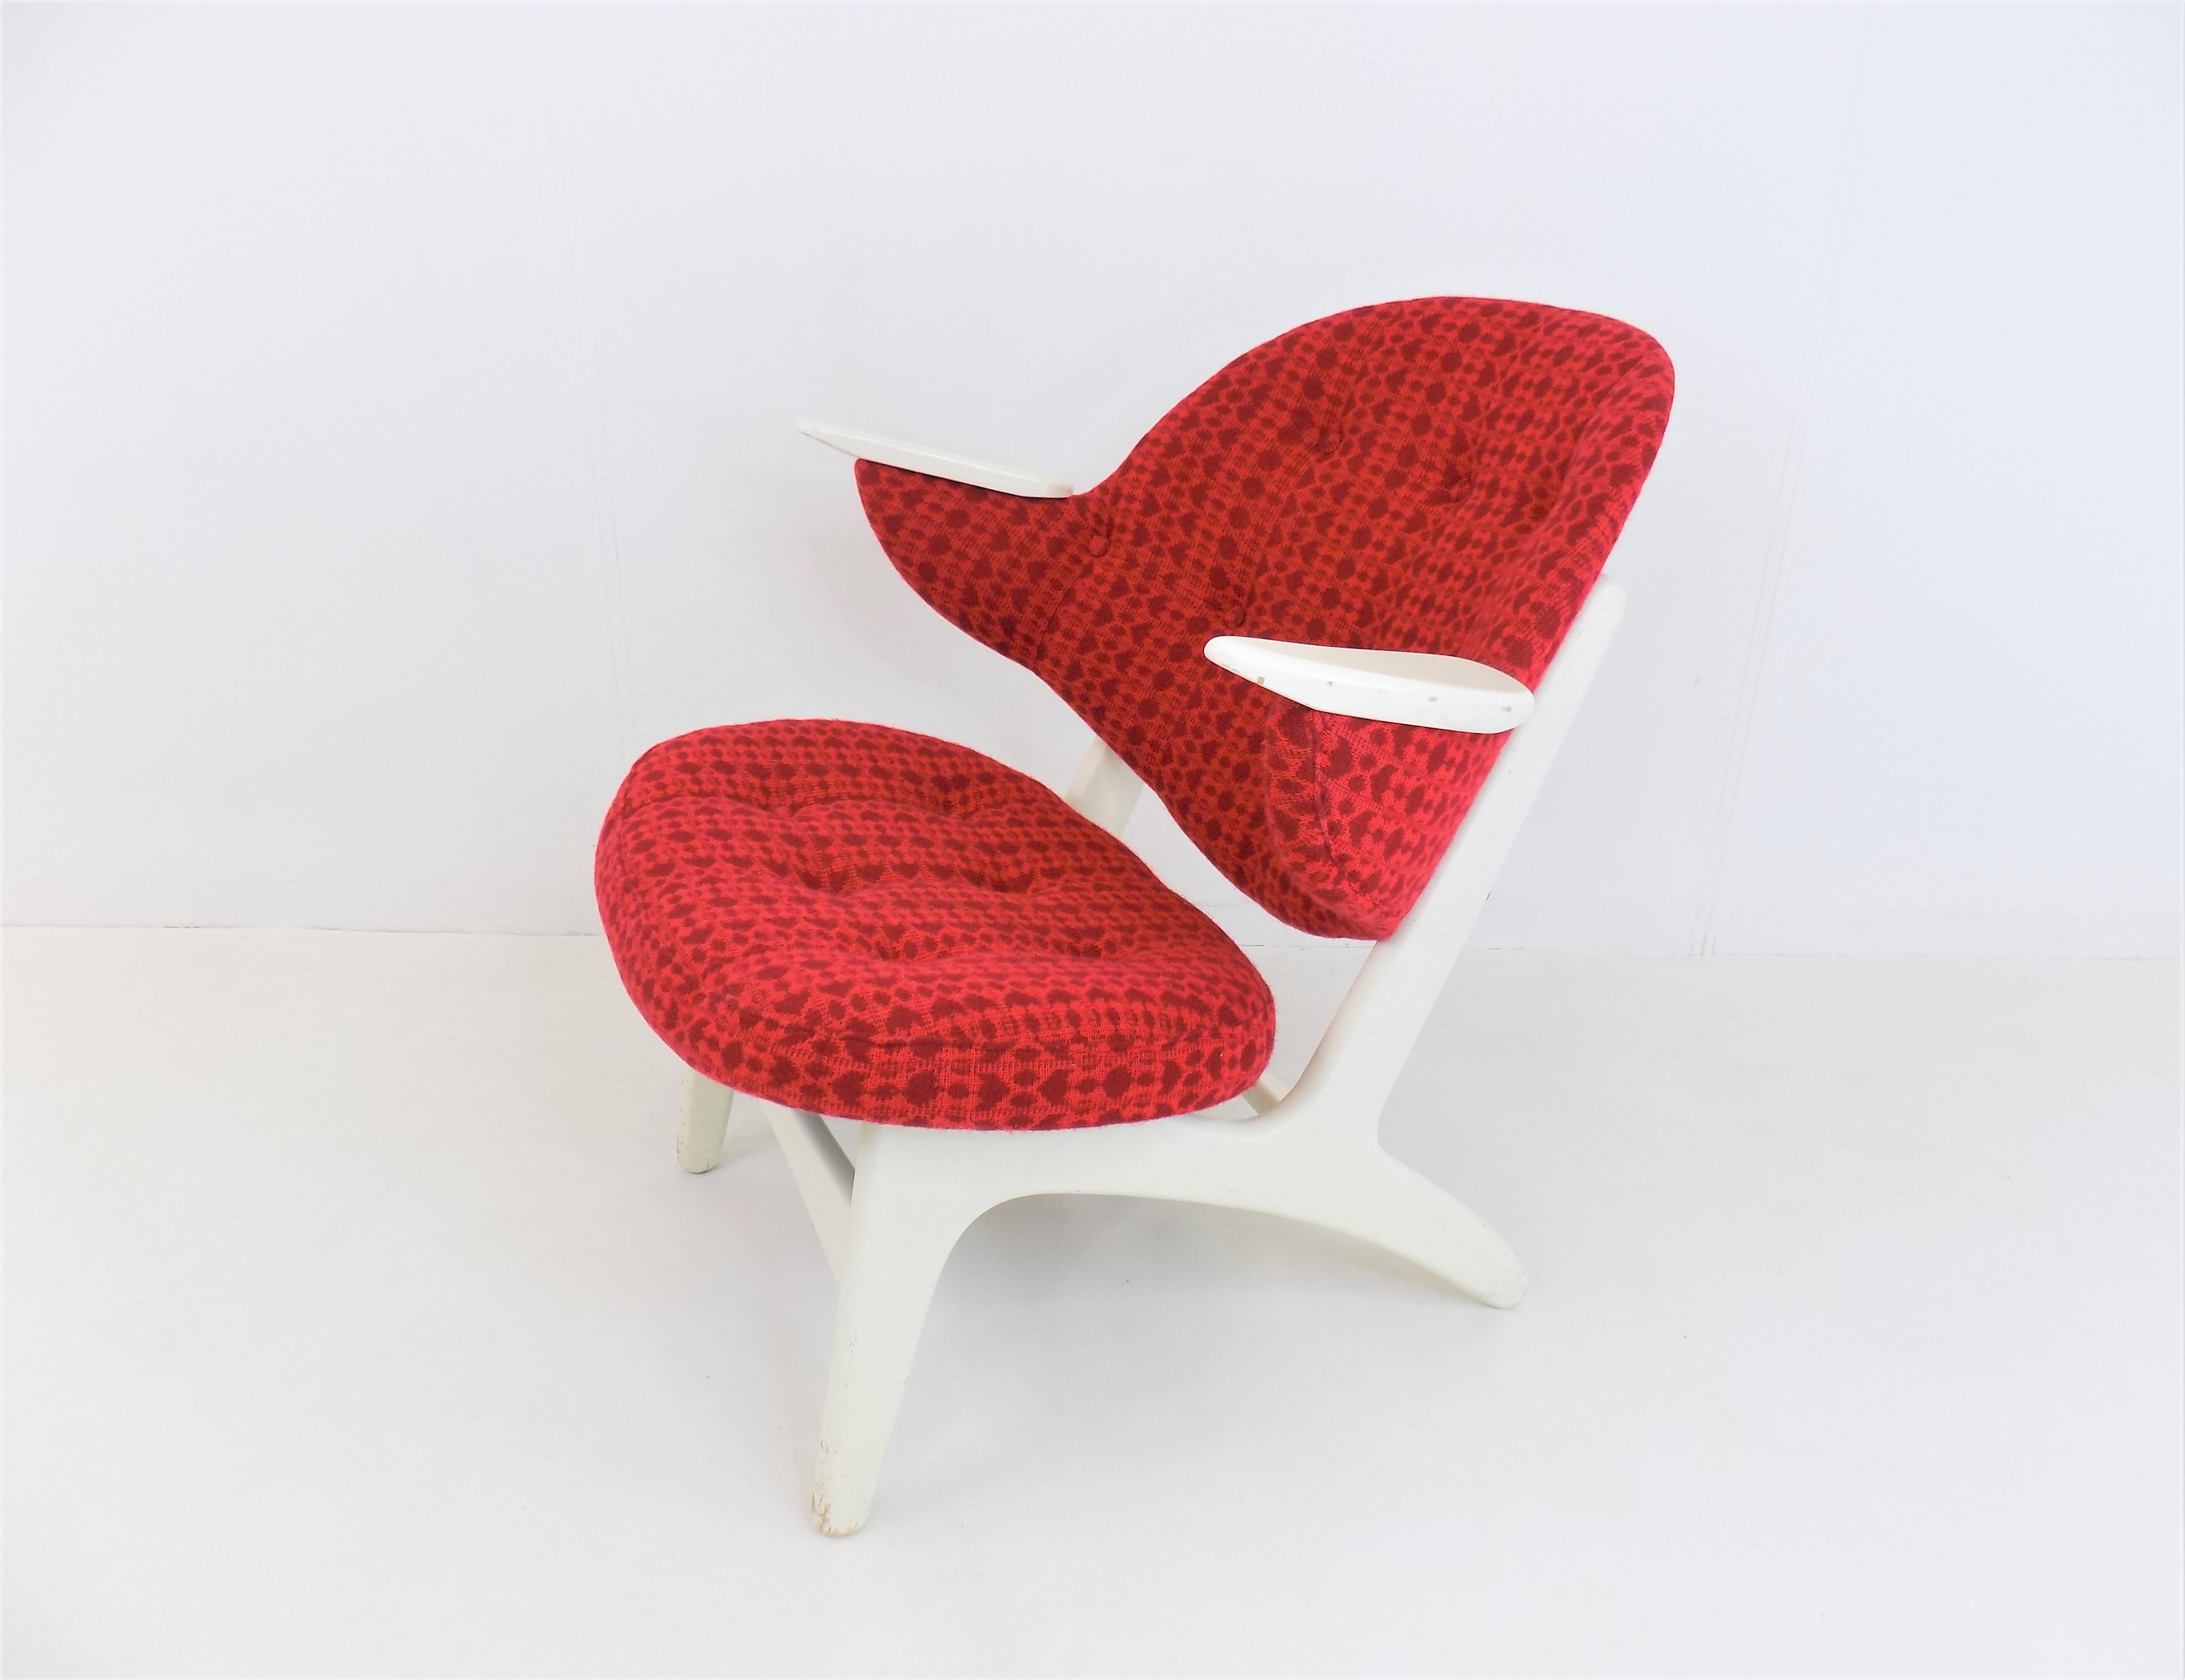 This Model 33 Easy Chair comes in an extraordinary color combination. The white wooden frame shows slight signs of wear, the seat and back cushions, with the original fabric in a beautiful red, are in good condition. All connections are tight. Due